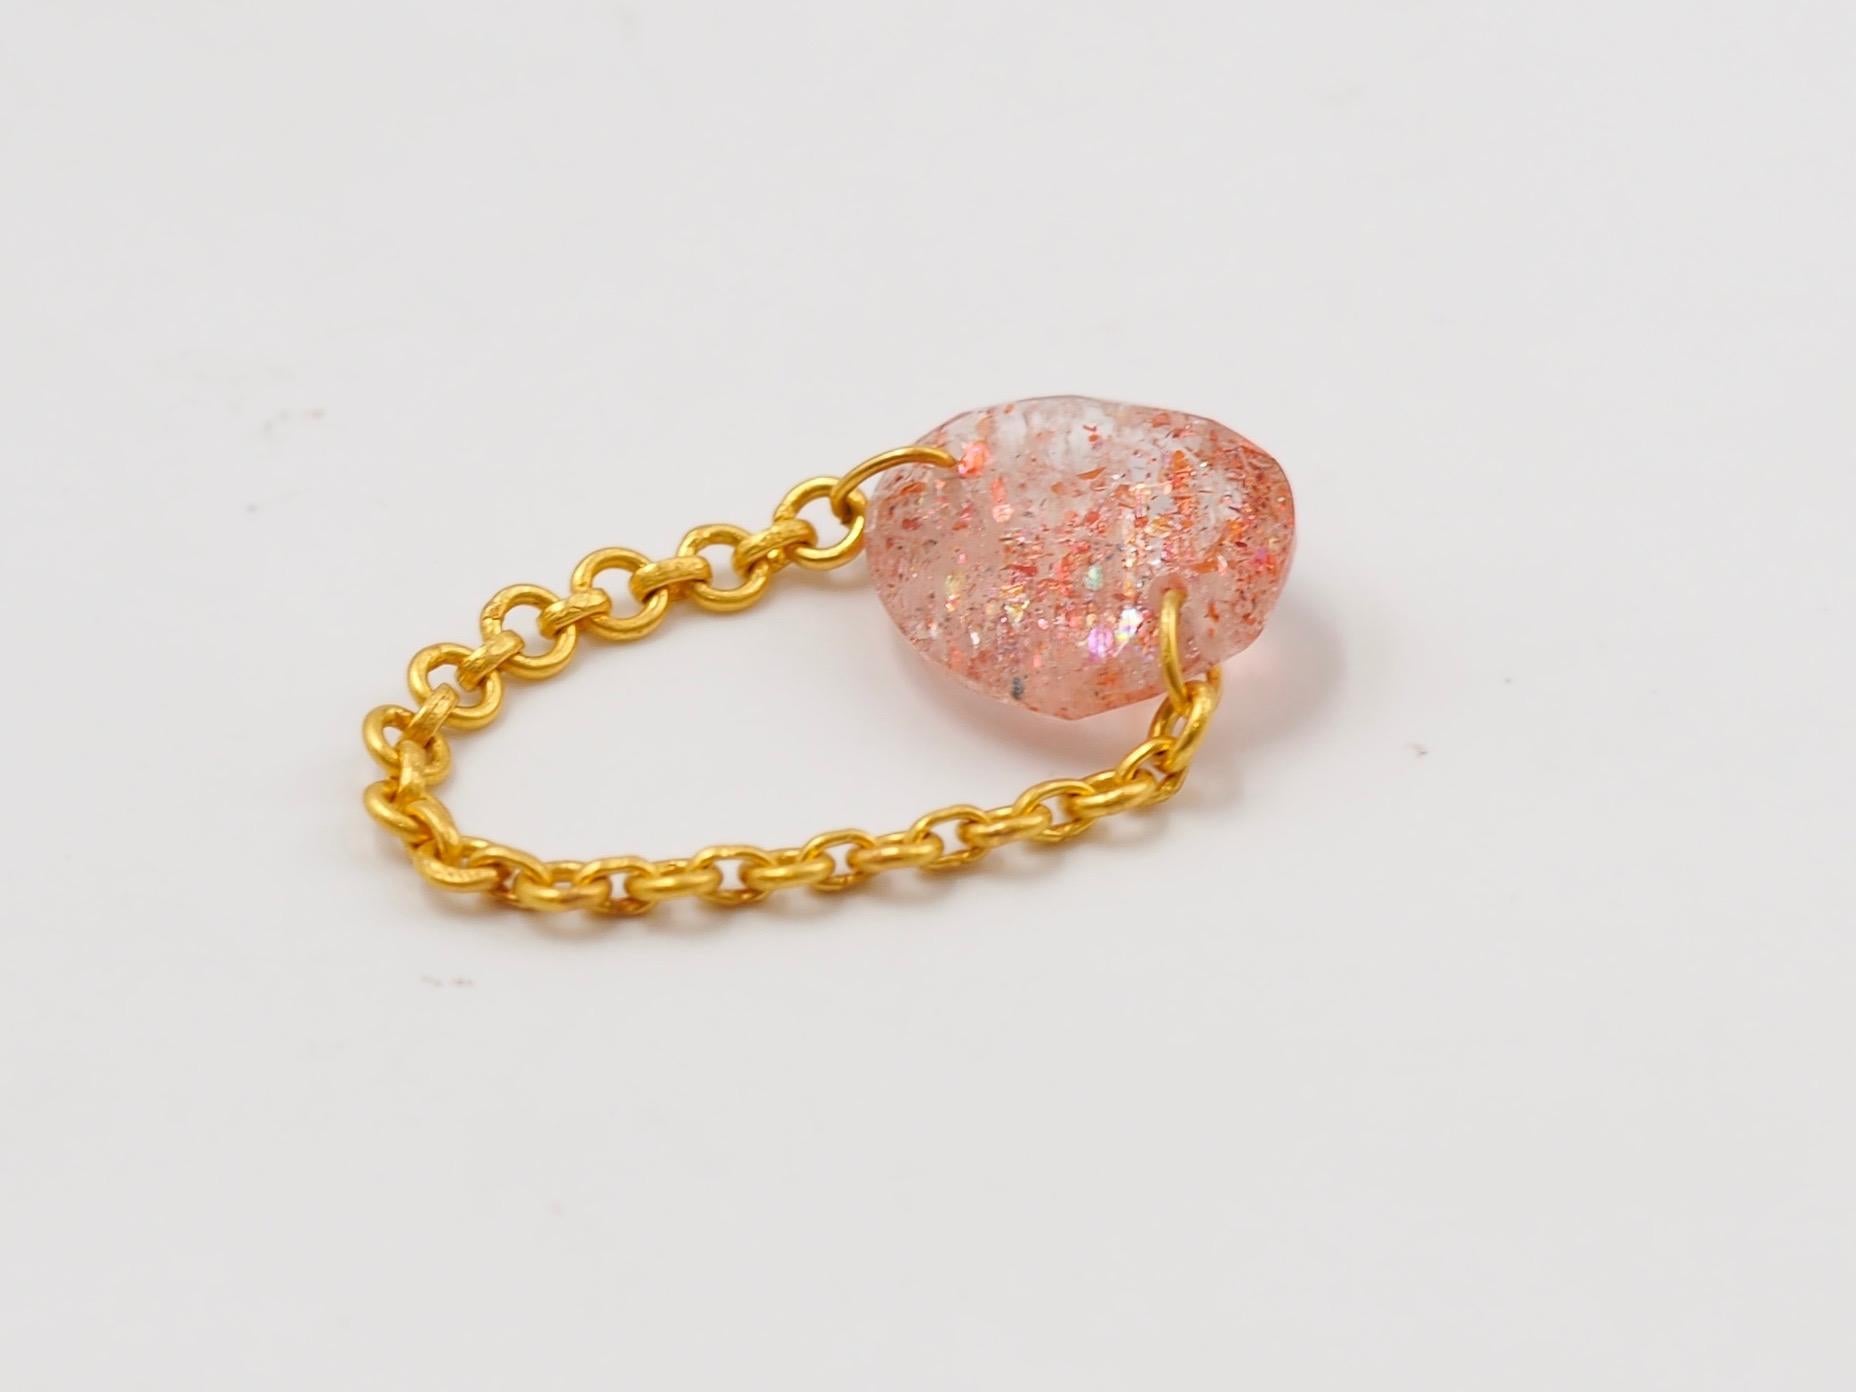 Scrives 4.83 Carat Sunstone Faceted 22 Karat Gold Chain Ring In New Condition For Sale In Paris, Paris